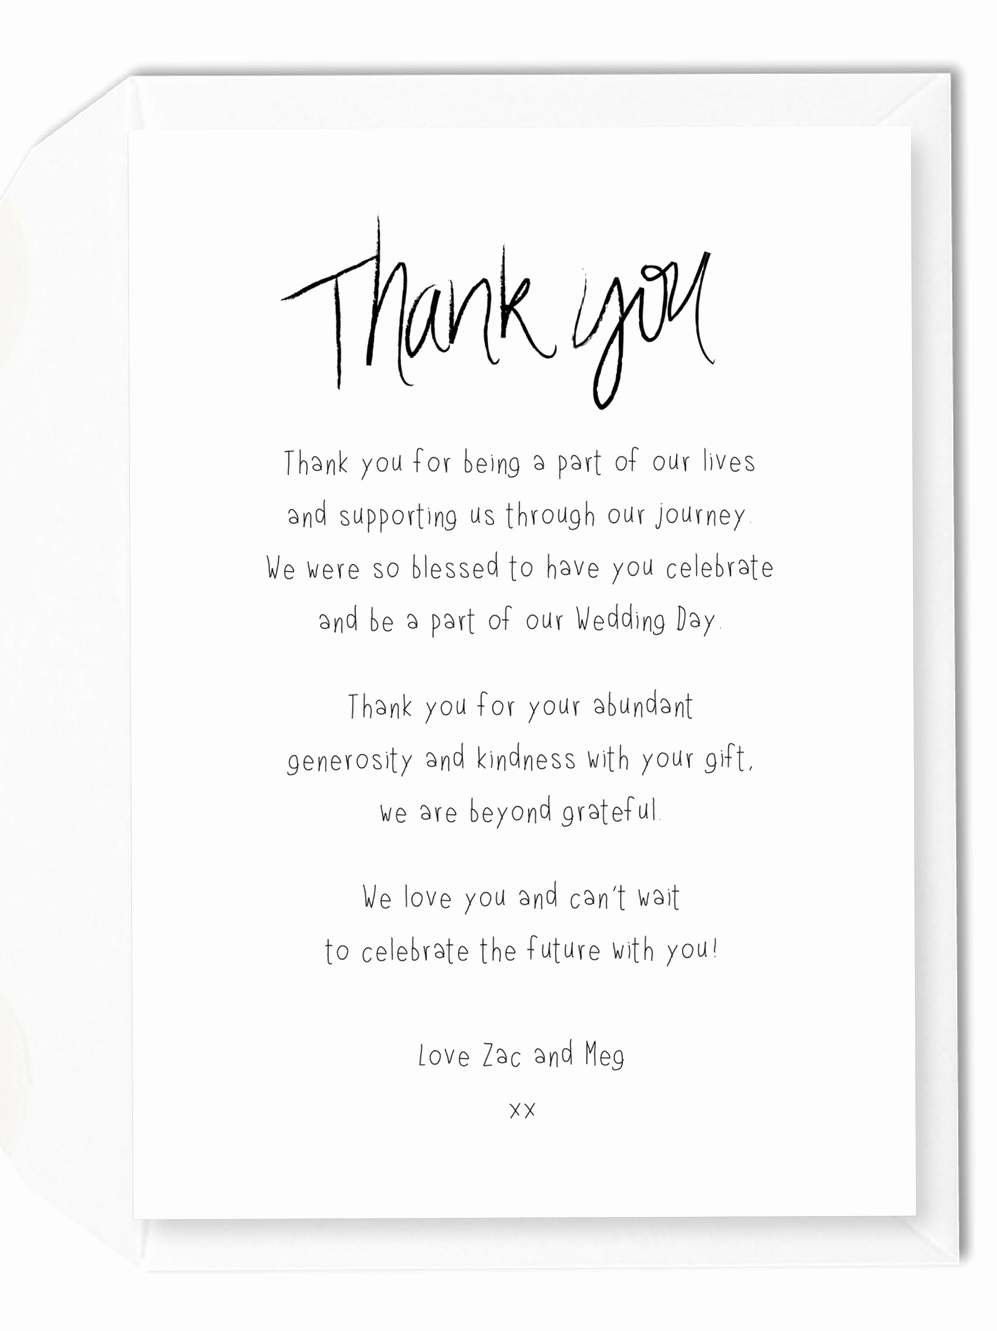 Words for Thank You Cards Elegant 5 Wording Ideas for Your Wedding Thank You Cards – for the